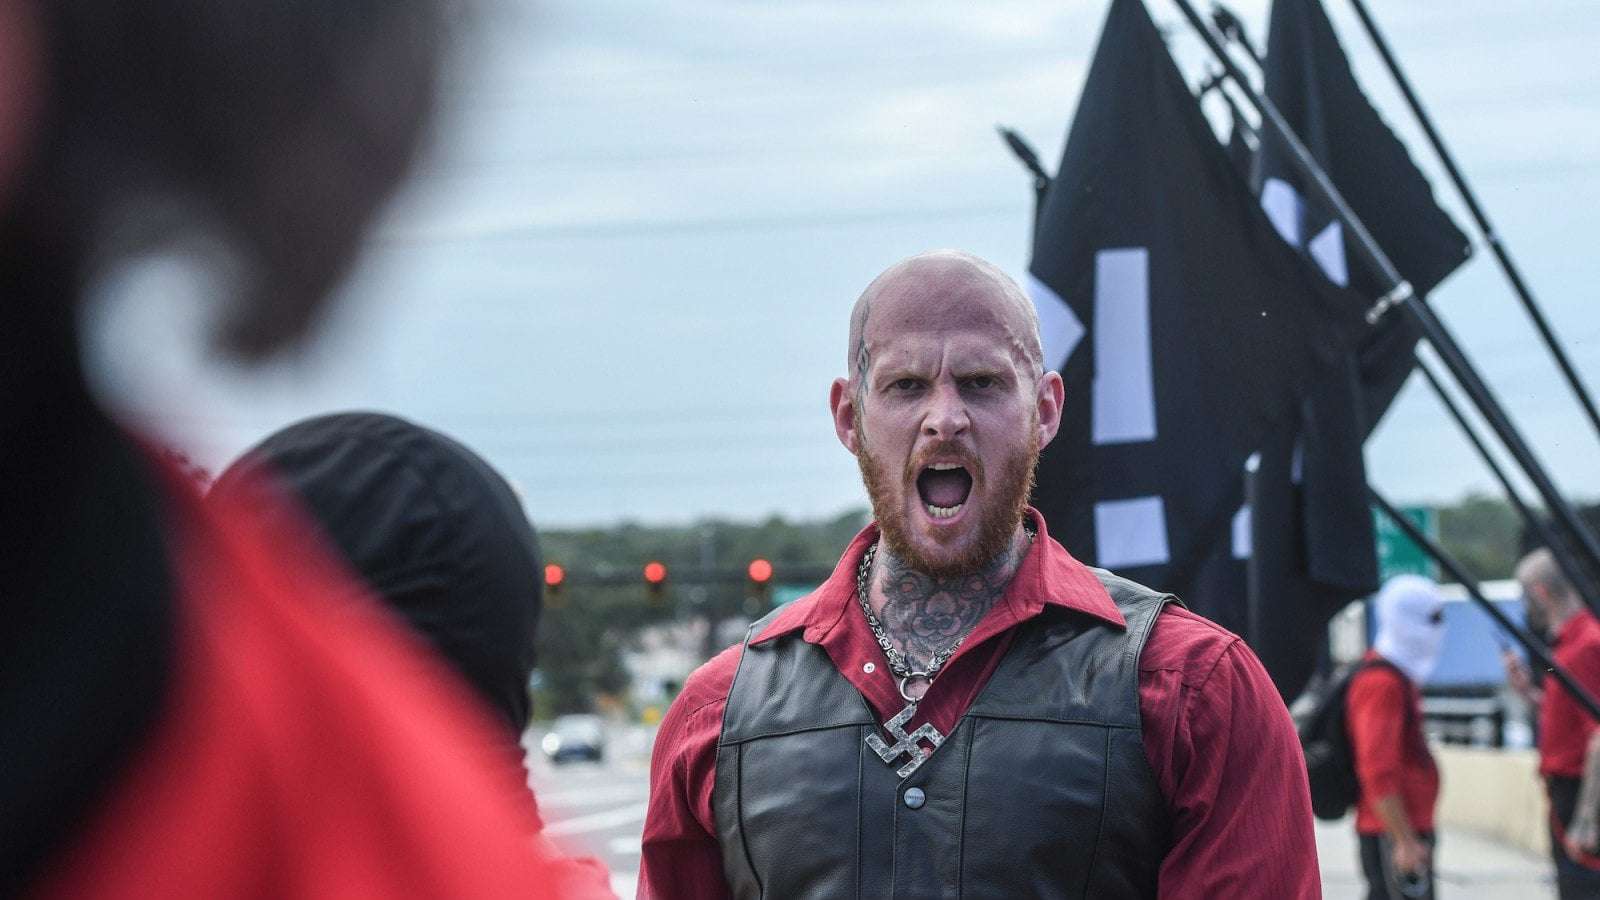 image for Videos Show Angry Neo-Nazis Cursing and Screaming Slurs During March in Florida